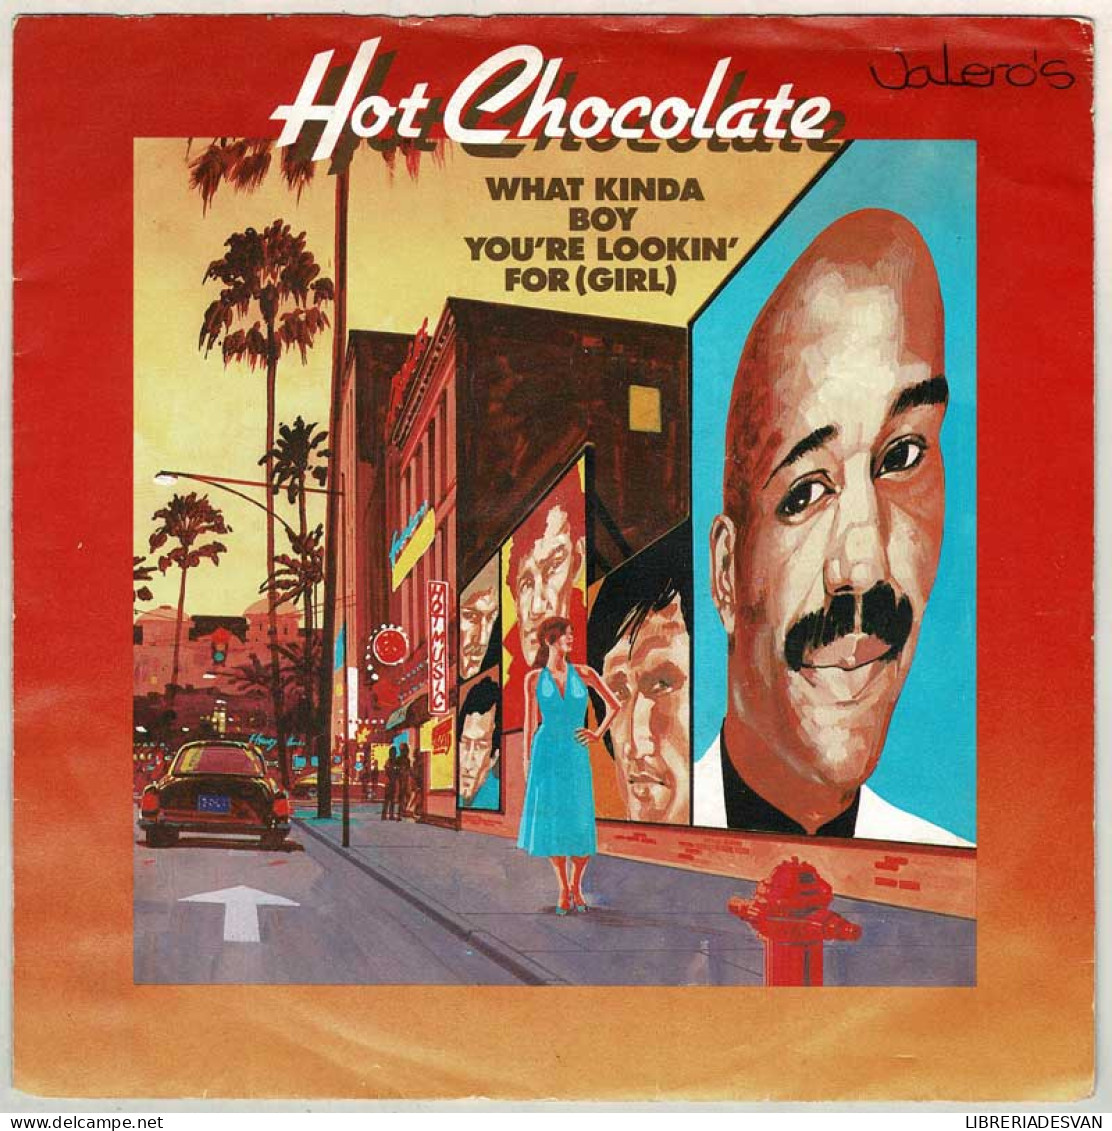 Hot Chocolate - What Kinda Boy You're Lookin' For (Girl) / Got To Get Back To Work. Single - Andere & Zonder Classificatie